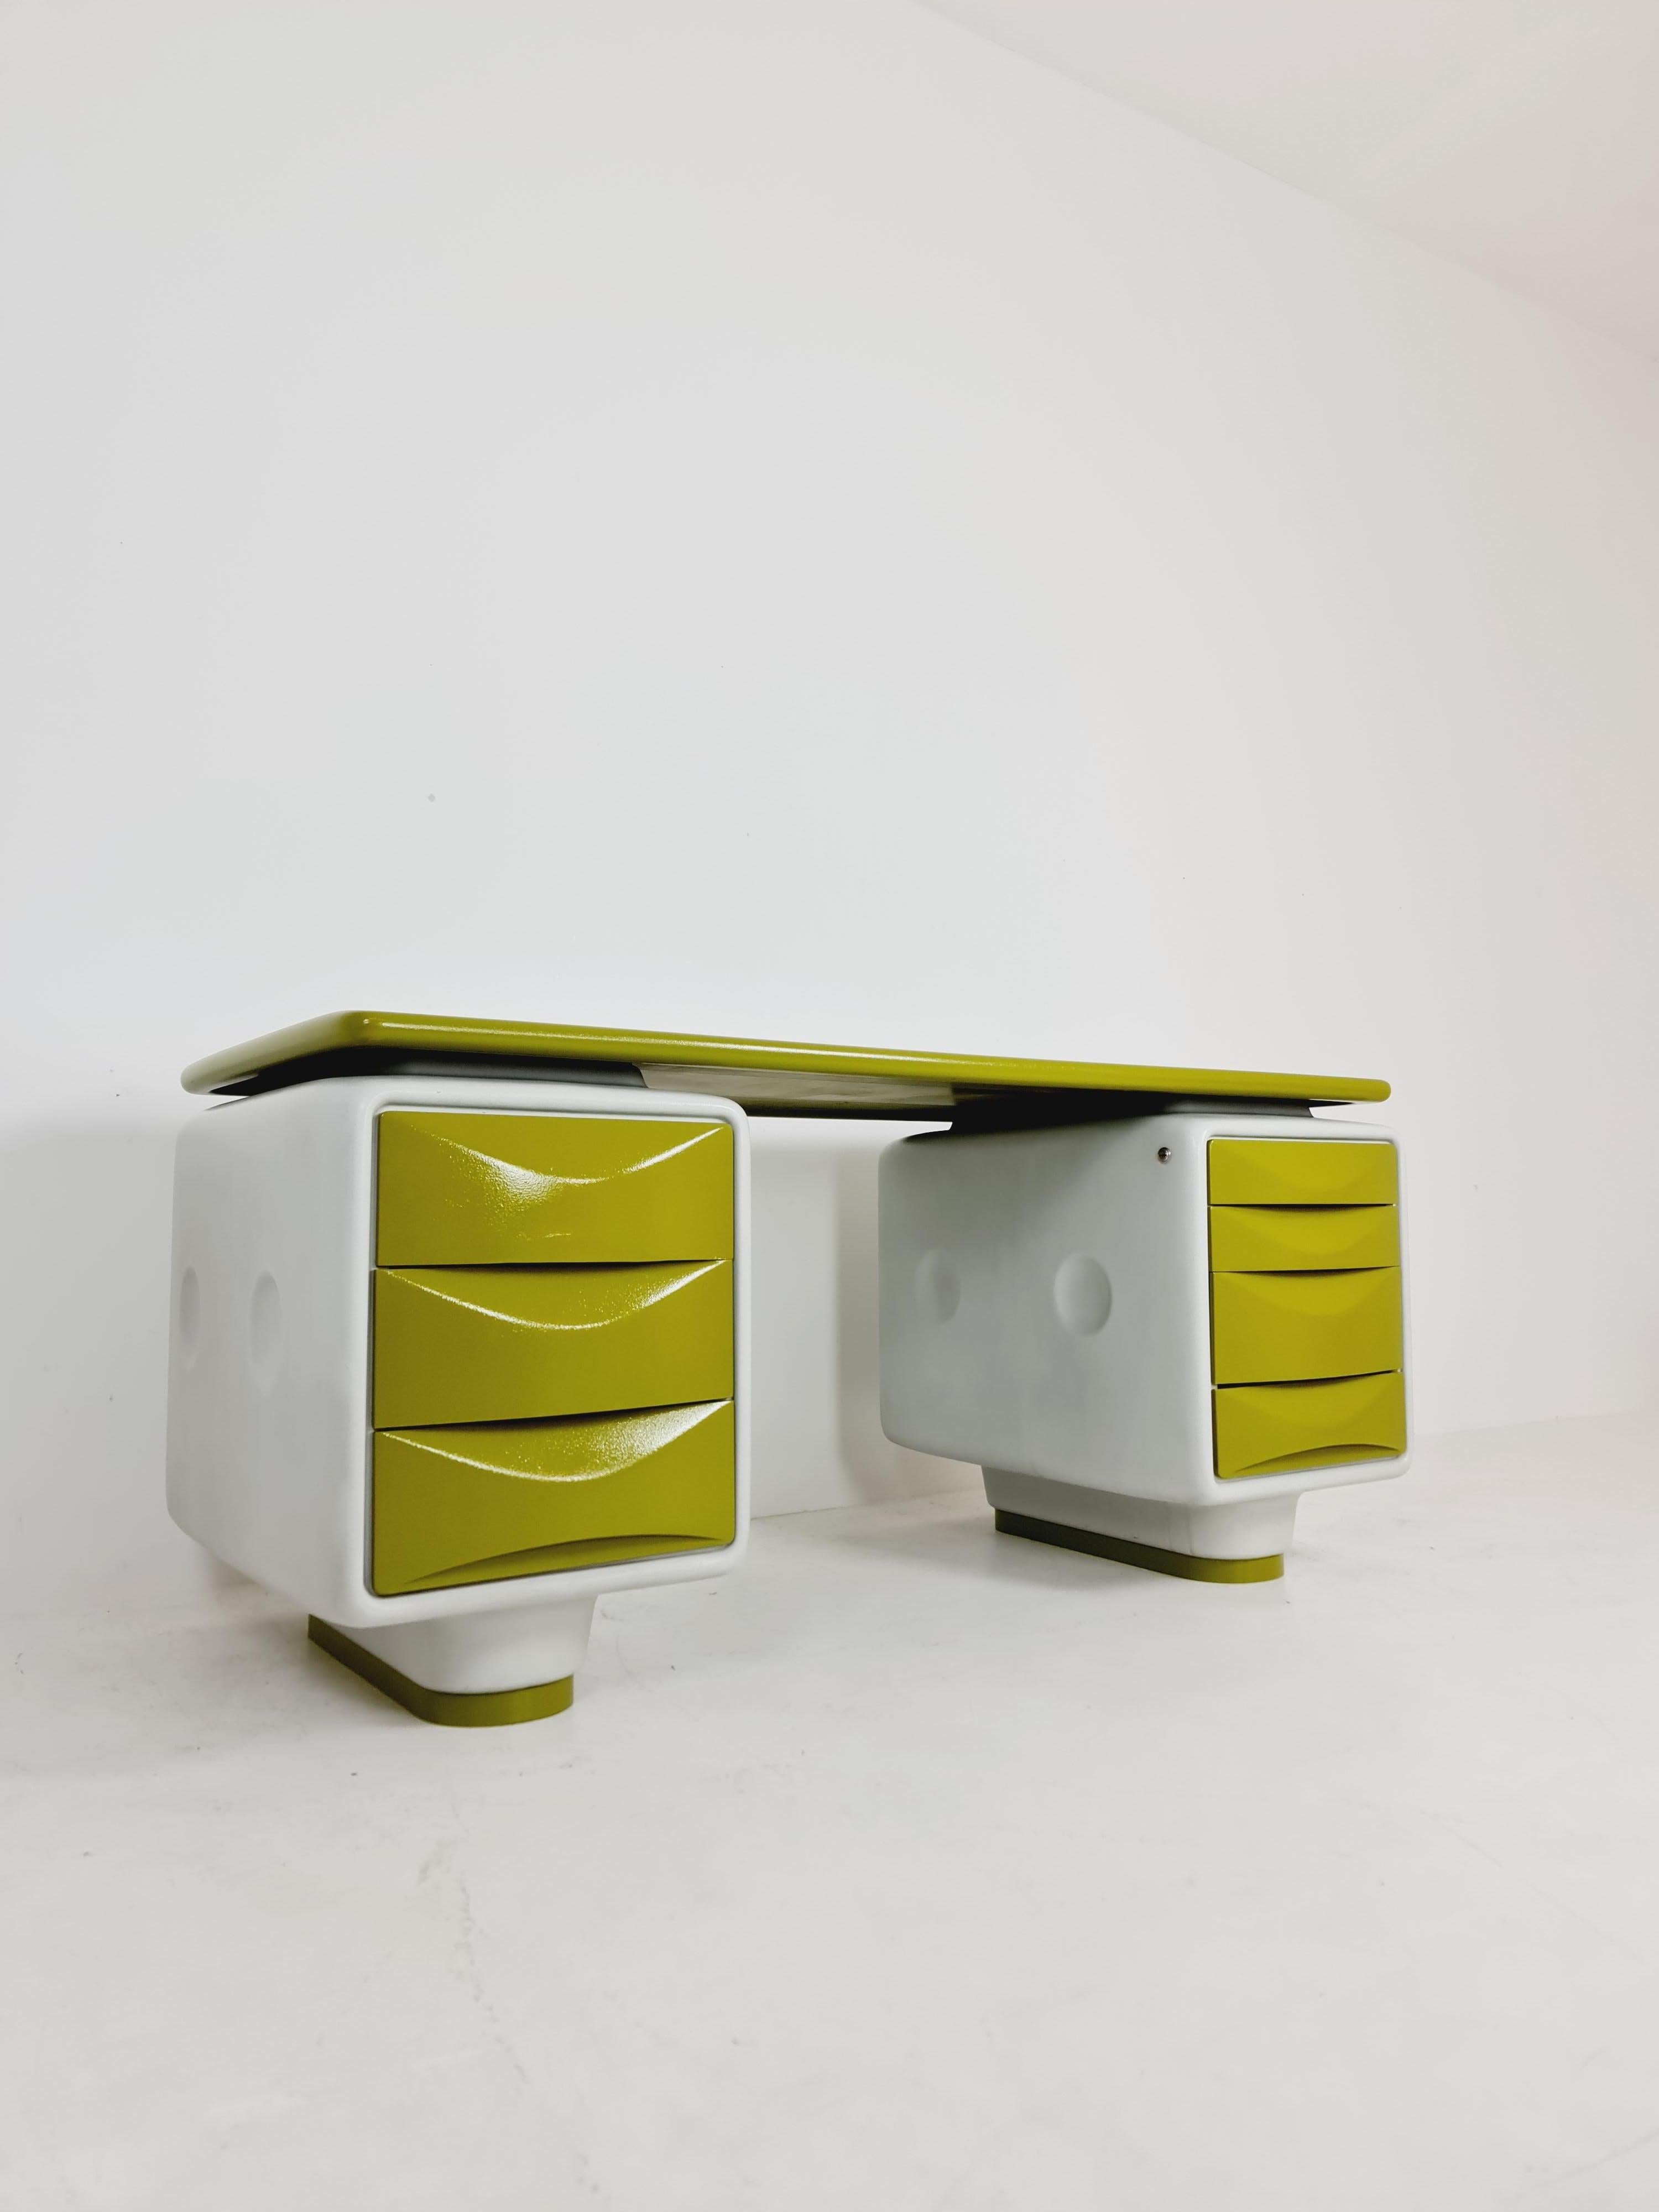 Space Age Ernest Igl for Wilhelm Werndl directors Igl-Jet fiberglass desk, 1970s

This design really evokes the ethos of the seventies - a bright and bold era - with the commonly used material of the time called fiberglass. Ernest Igl aimed to